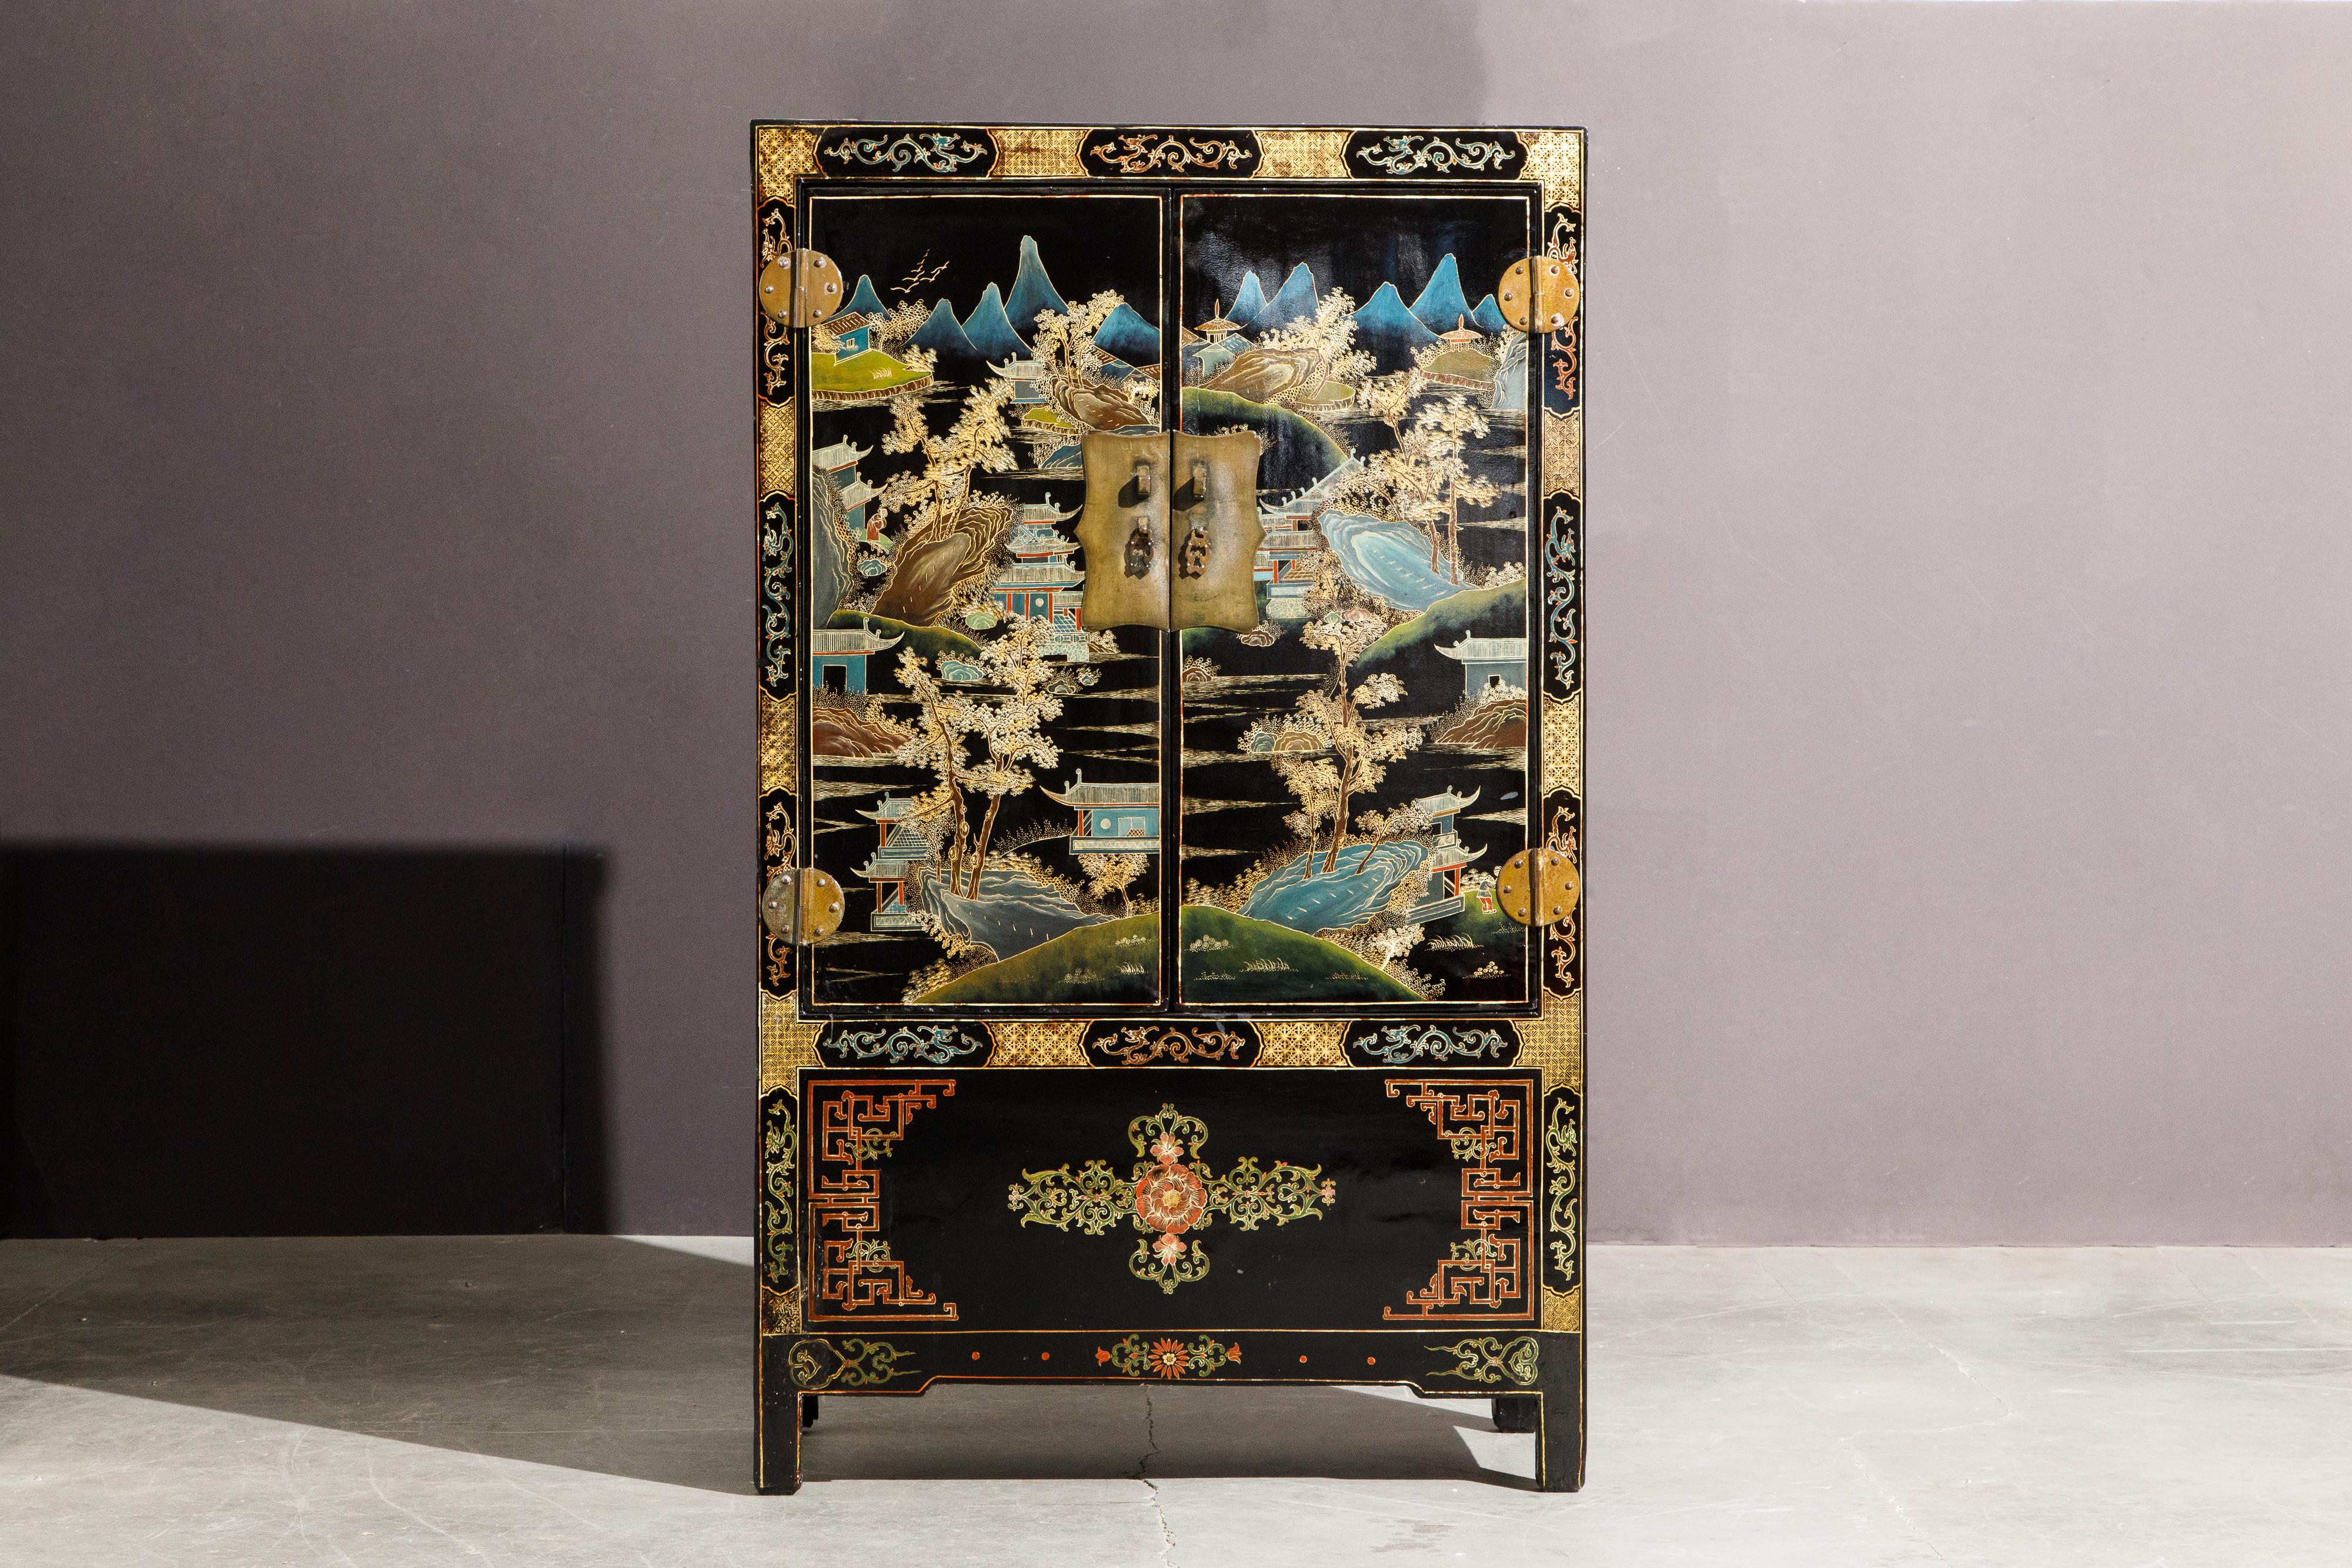 An exquisite antique 19th century Qing Dynasty gilt and black lacquered painted cabinet with double-doors, freshly refinished with a French Polish - furthering the beauty of this piece and protecting the underlying hand painted artistry. Constructed